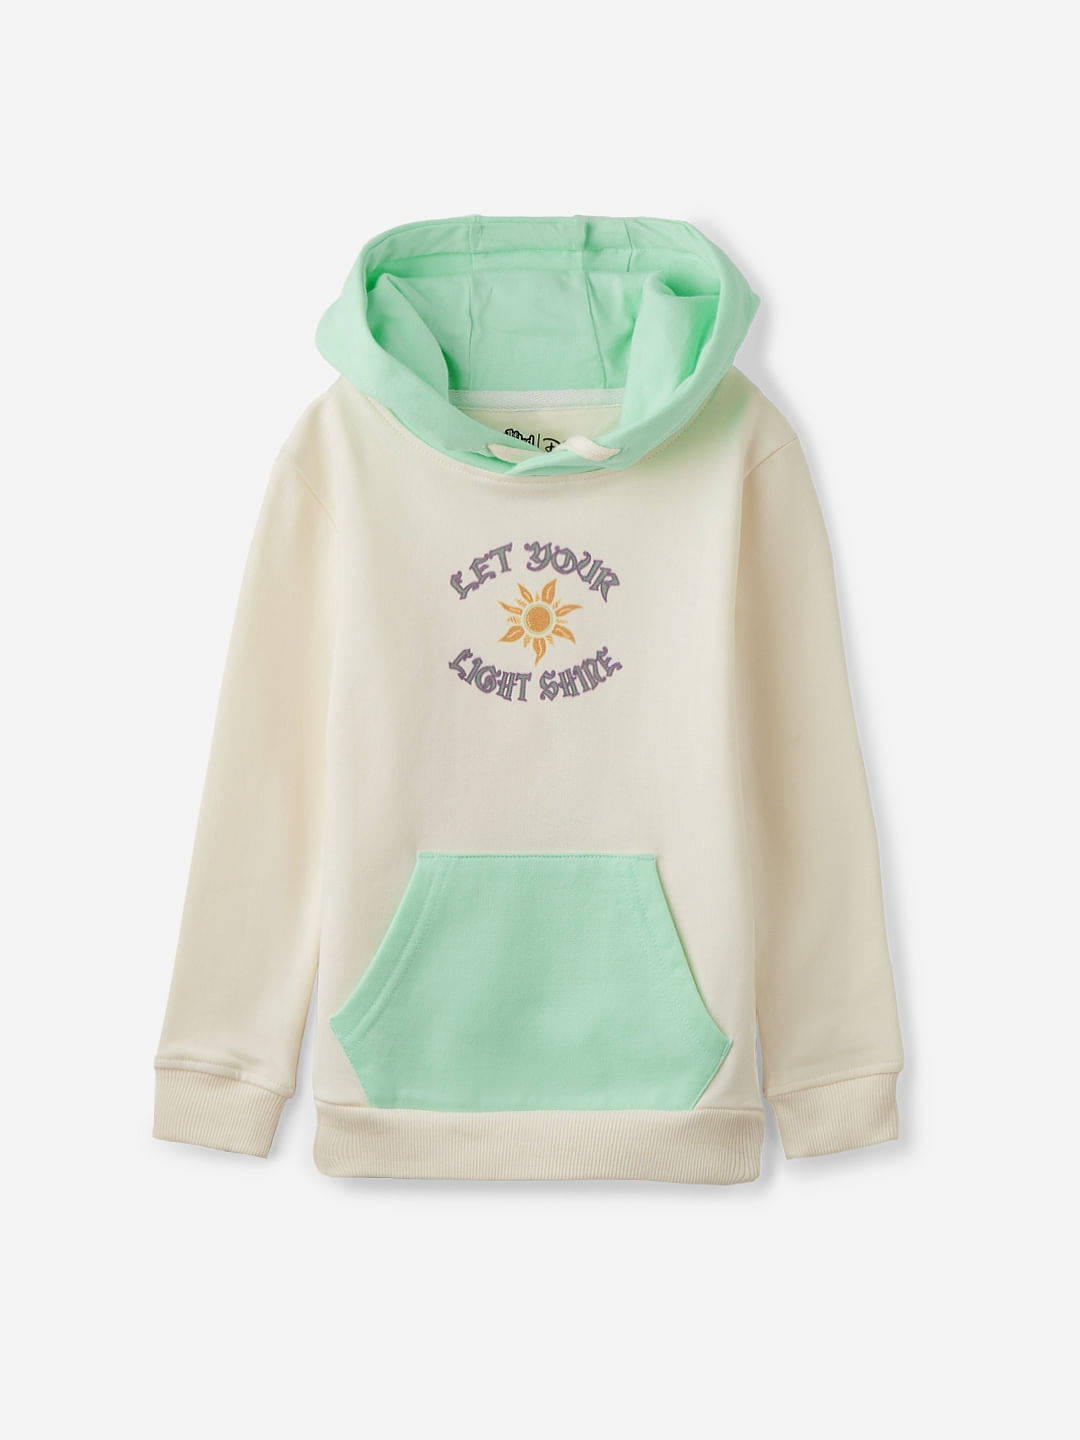 The Souled Store | Girls Disney: Let Your Light Shine Girls Cotton Hoodie